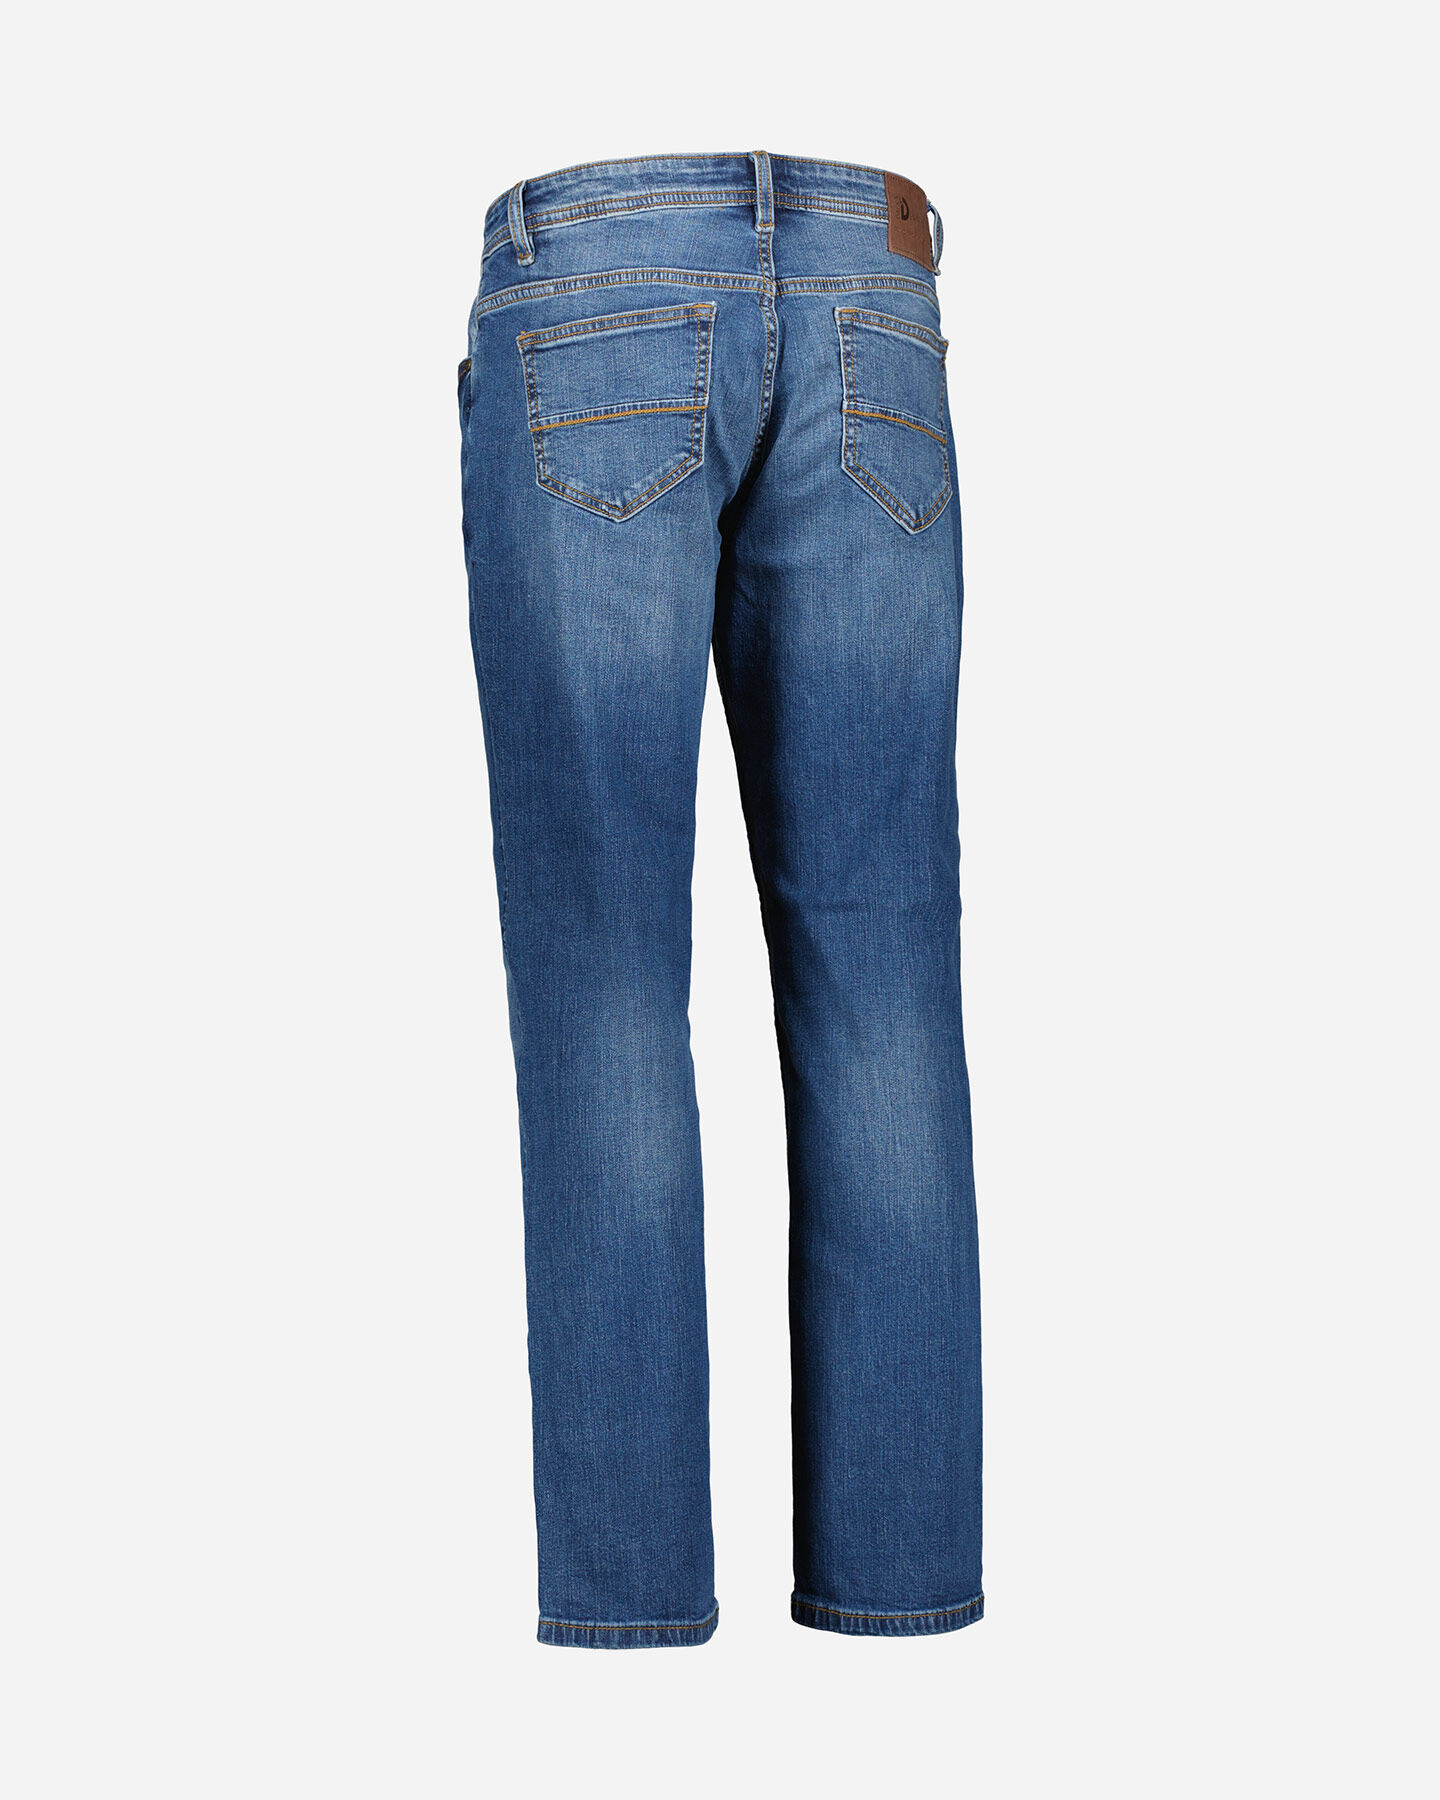  Jeans DACK'S CASUAL CITY M S4106781|MD|52 scatto 5